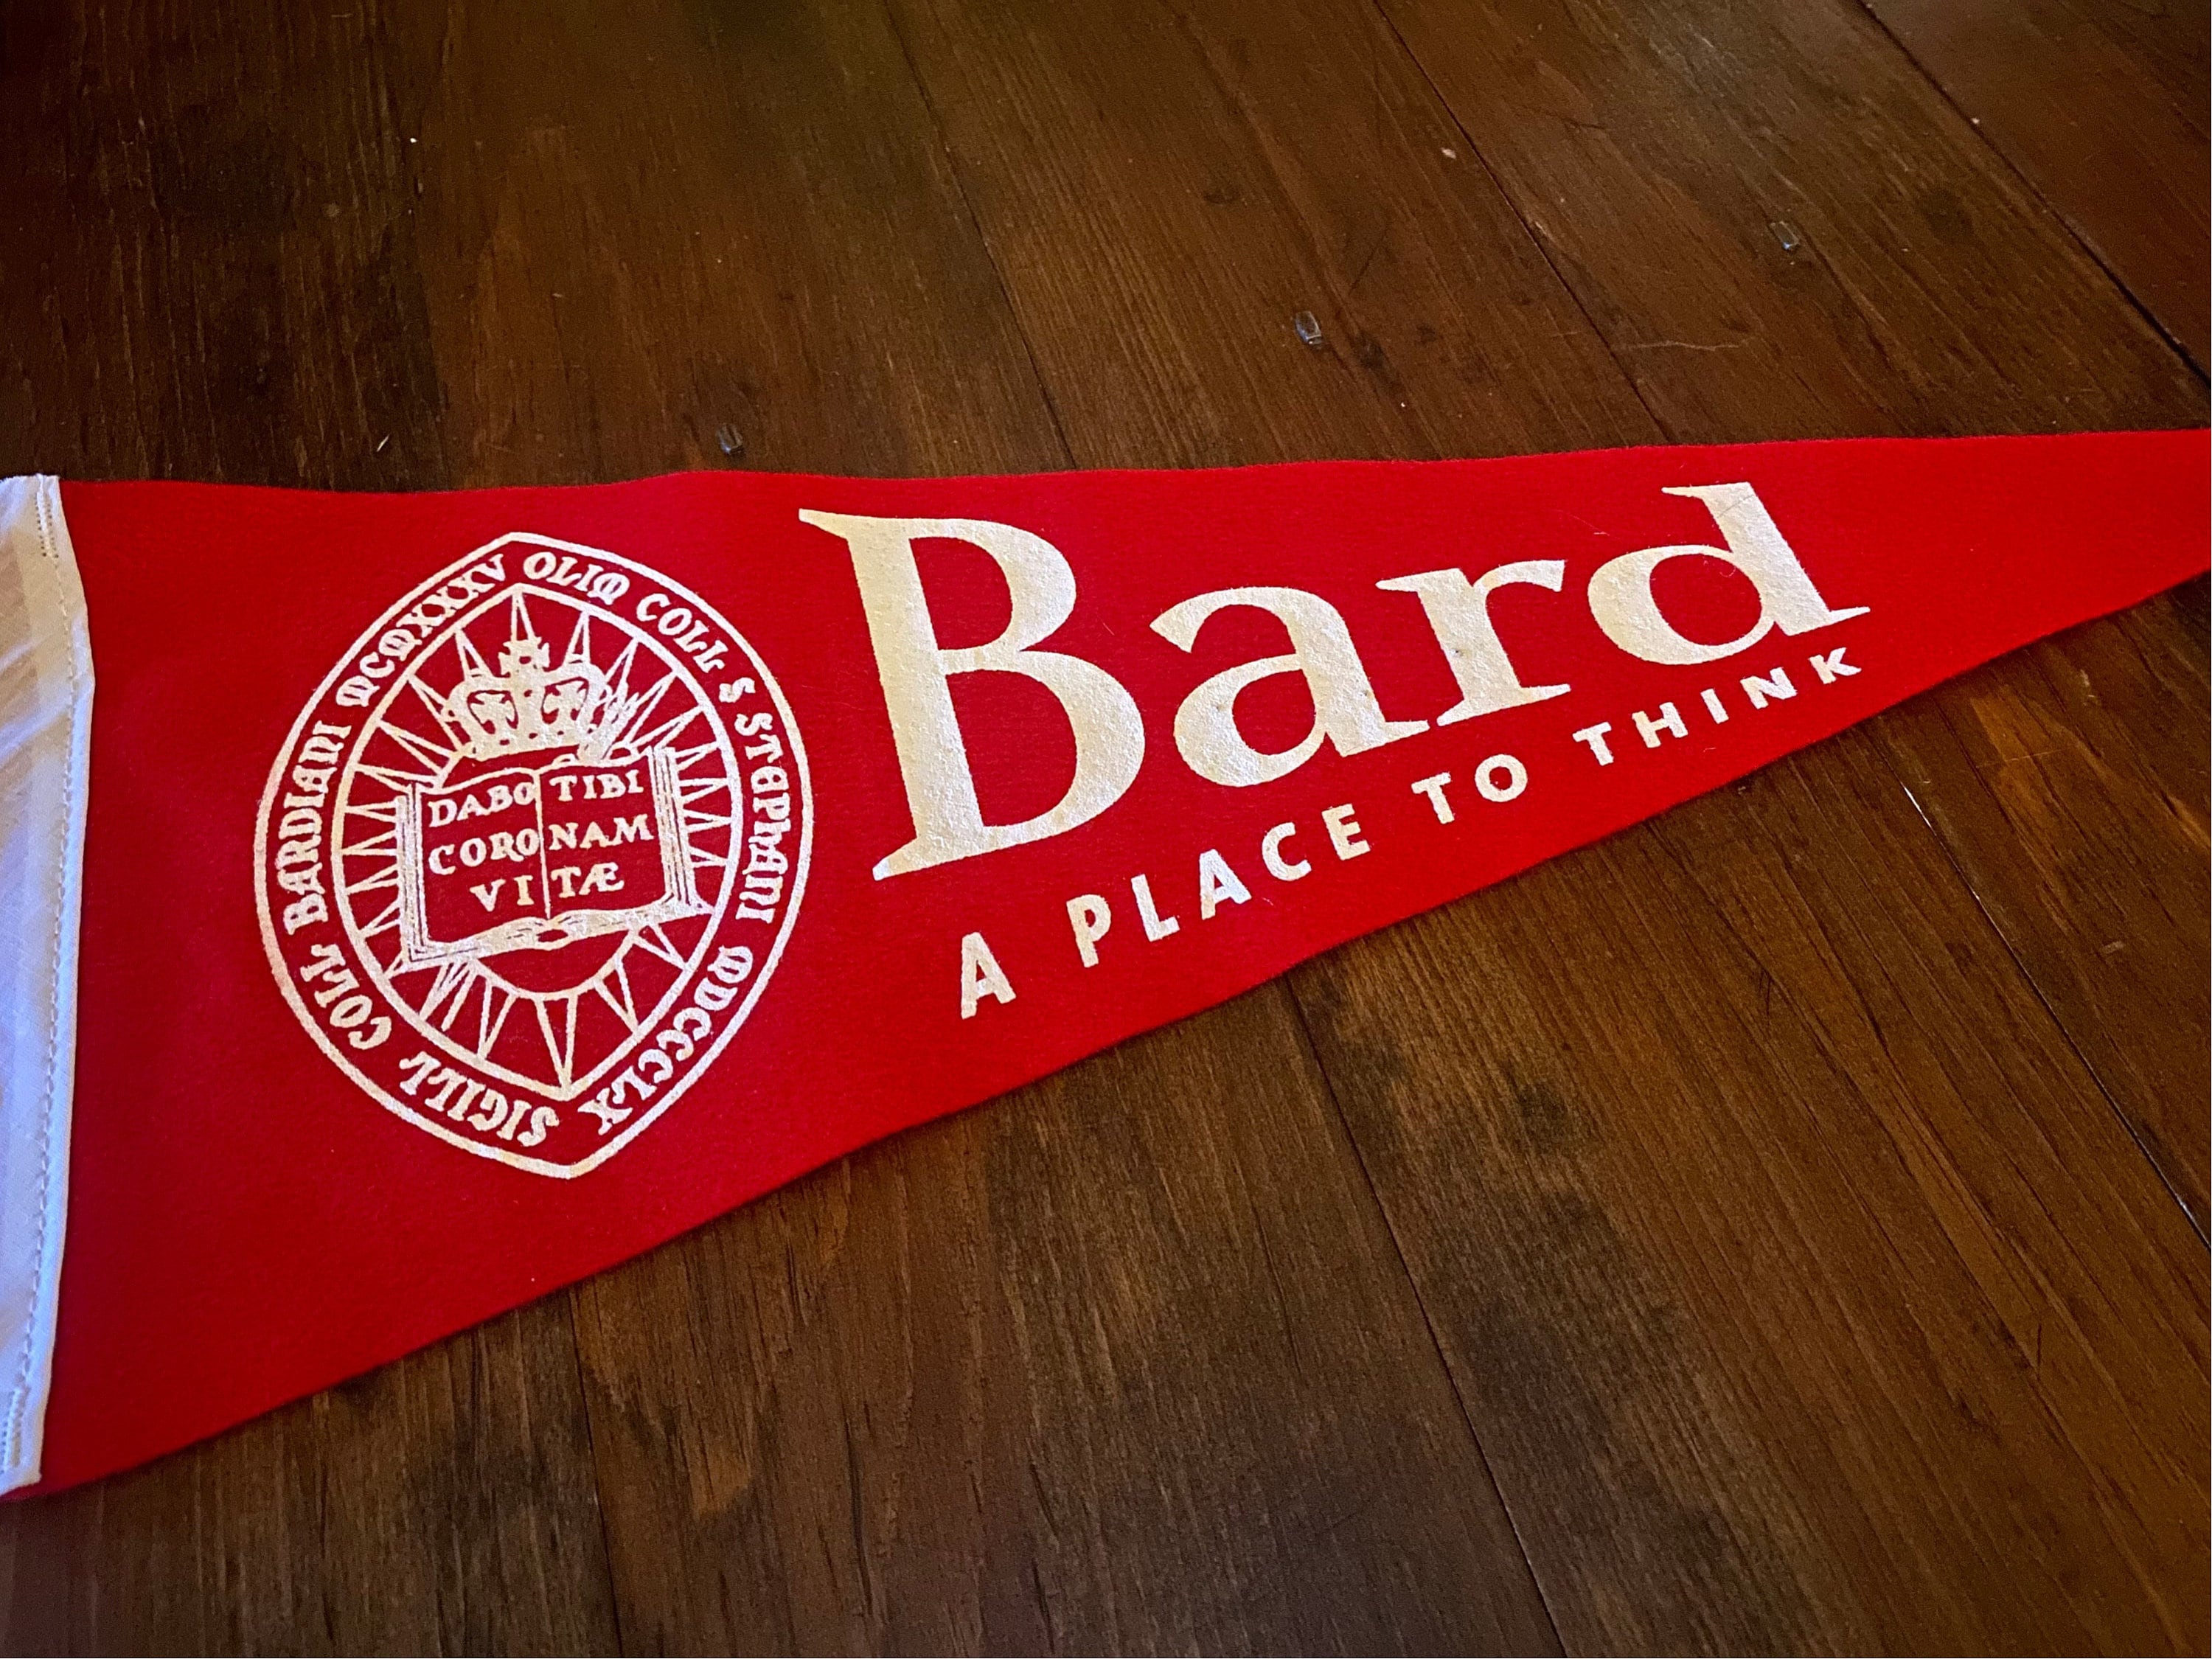 Bard College Ladies Clothing, Gifts & Fan Gear, Ladies Apparel